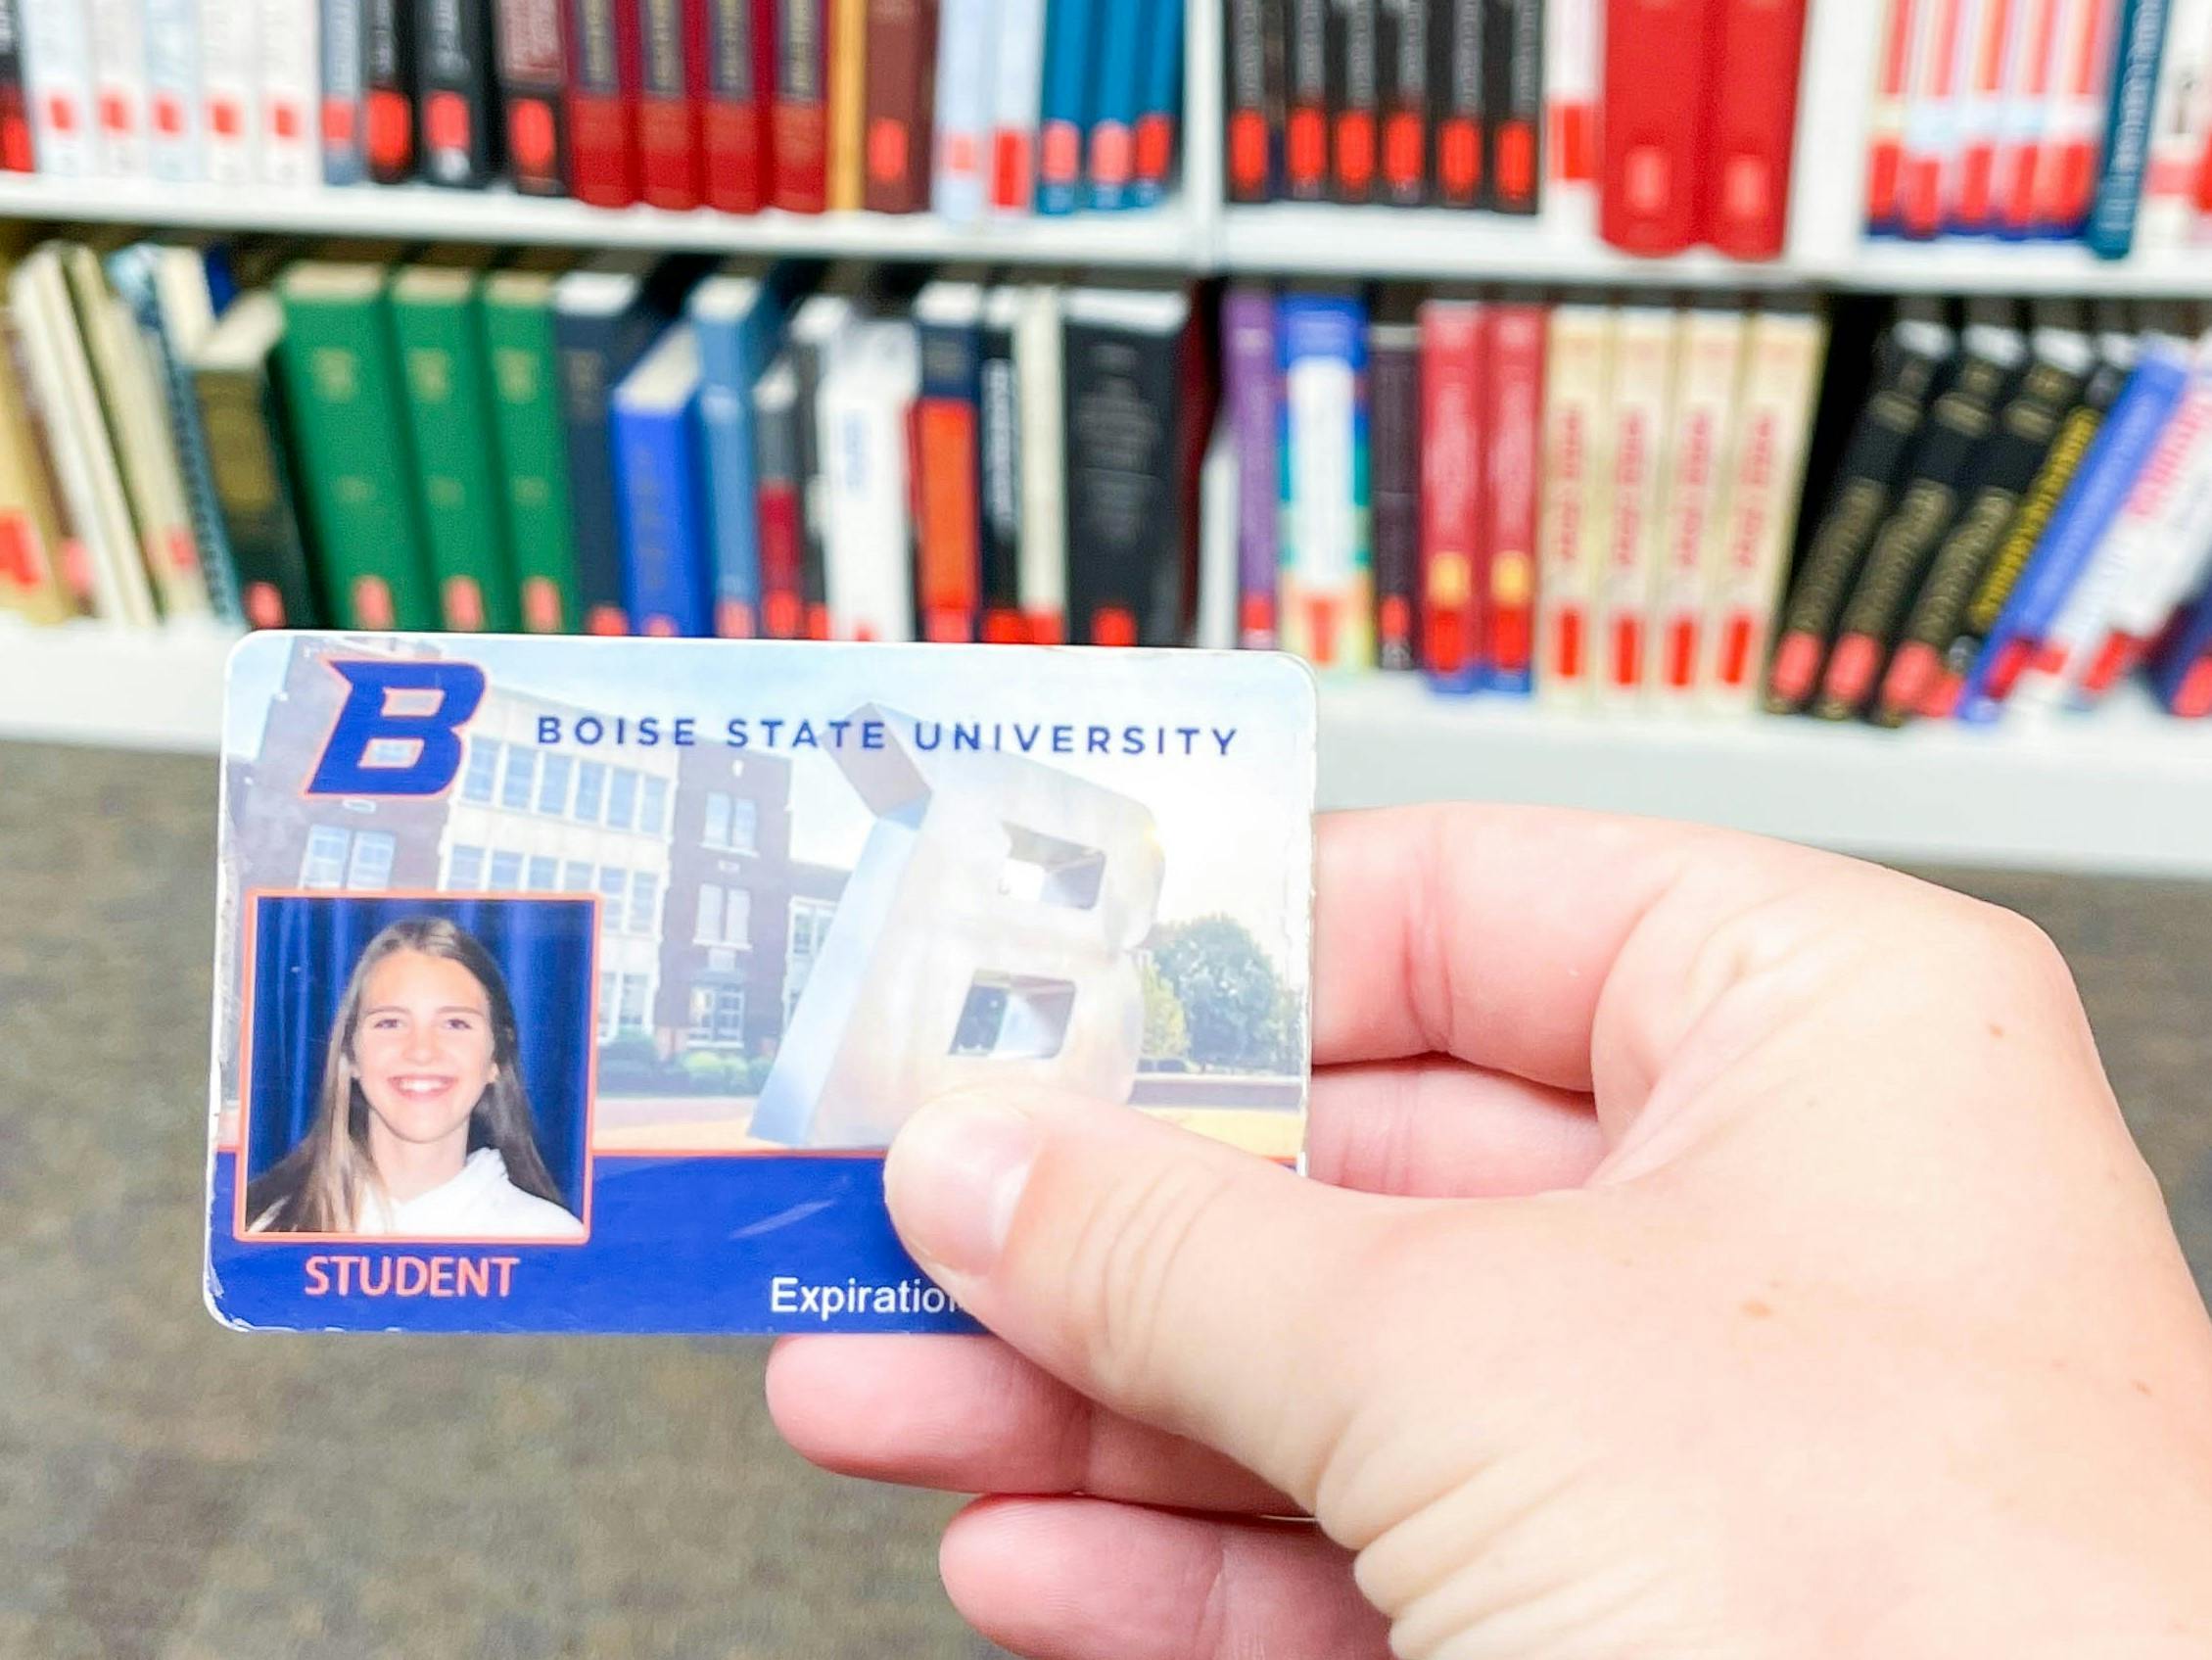 A college student holding their student ID in front of a bookshelf in a library.